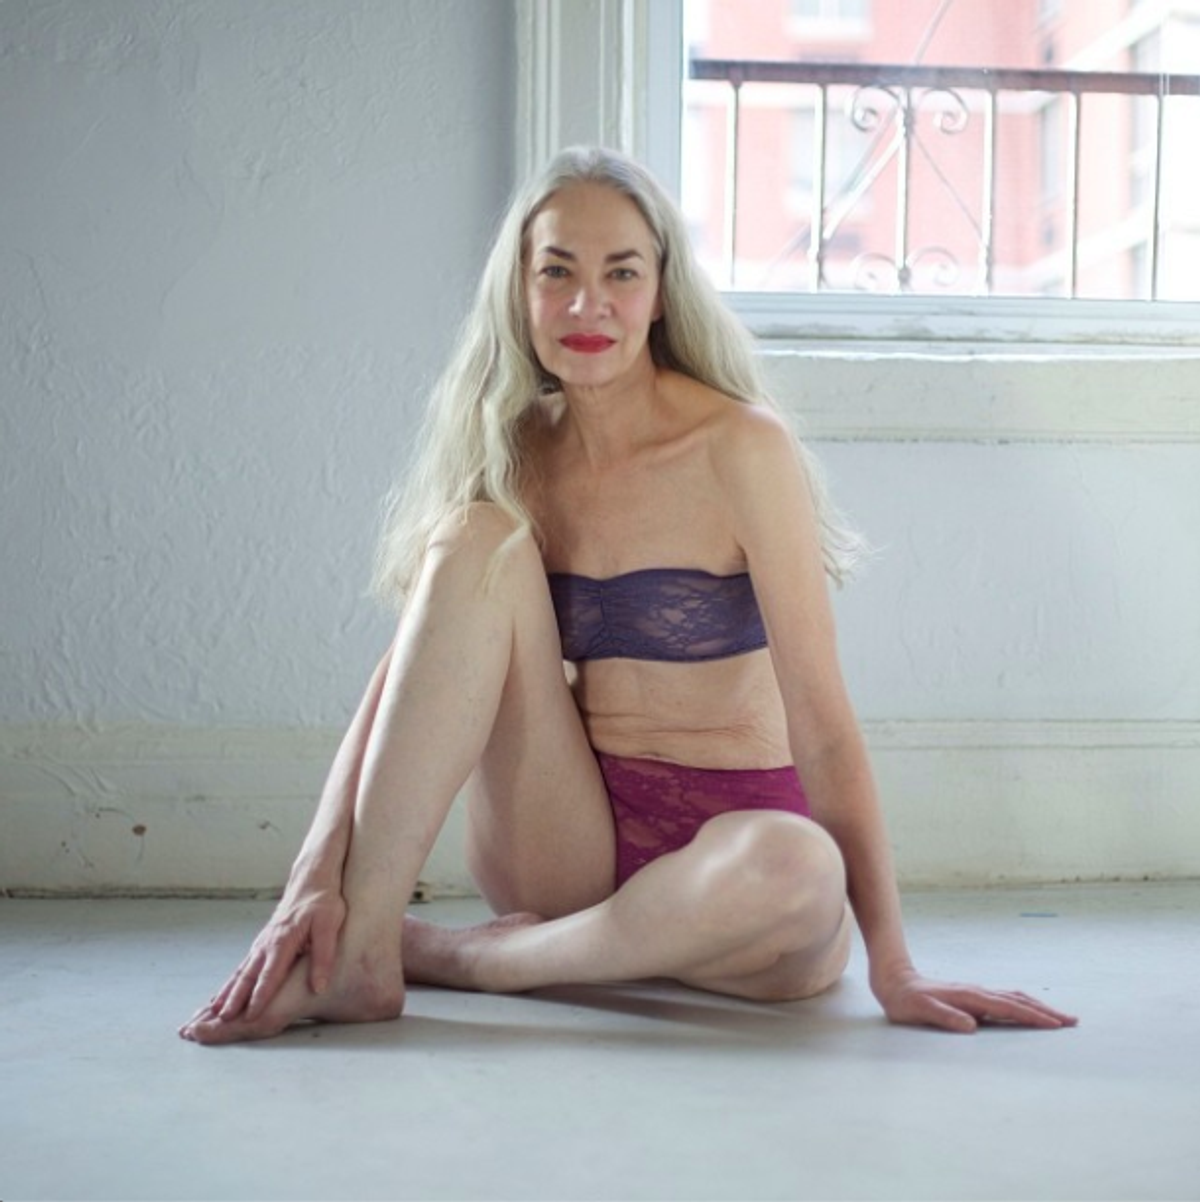 American Apparel features 62-year-old lingerie model | Salon.com